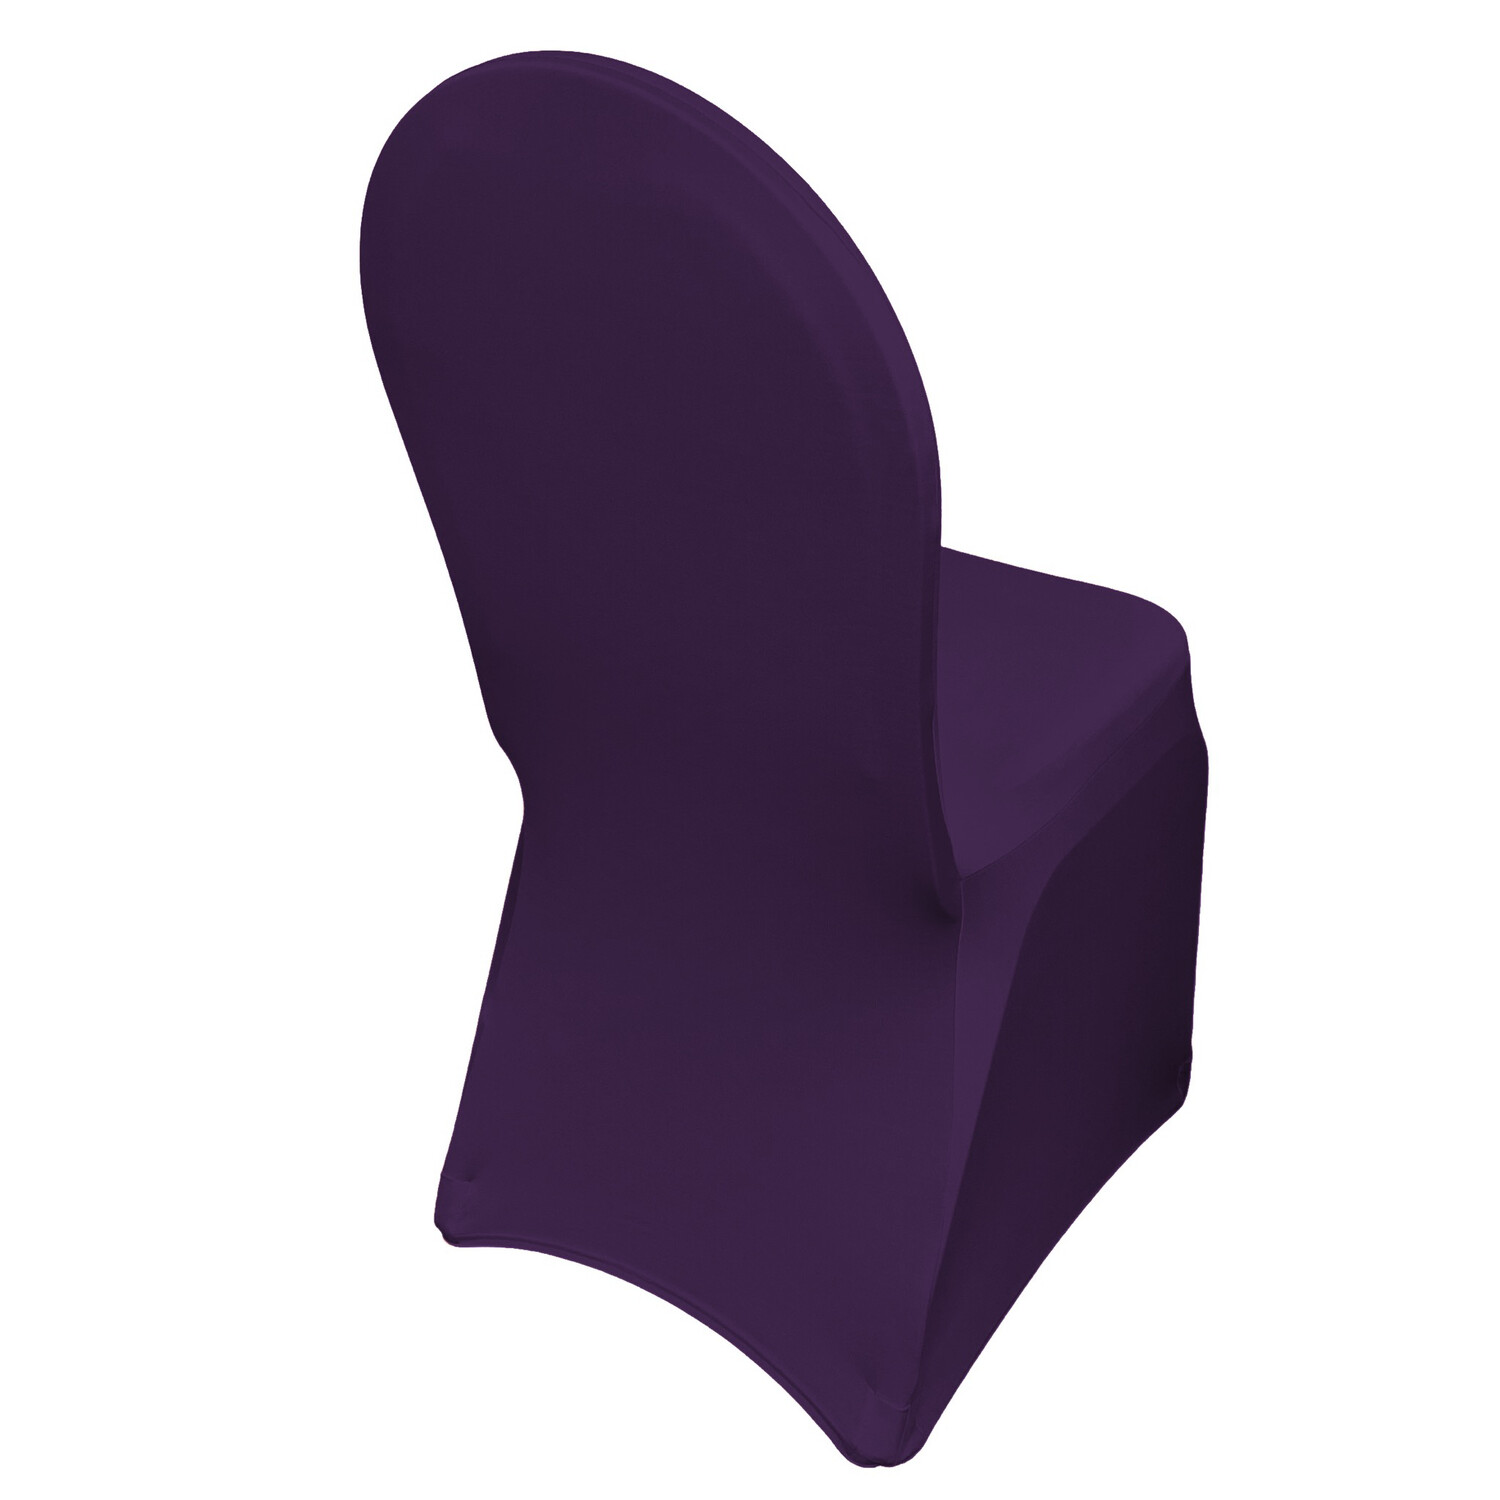 Eggplant Spandex Chair Covers